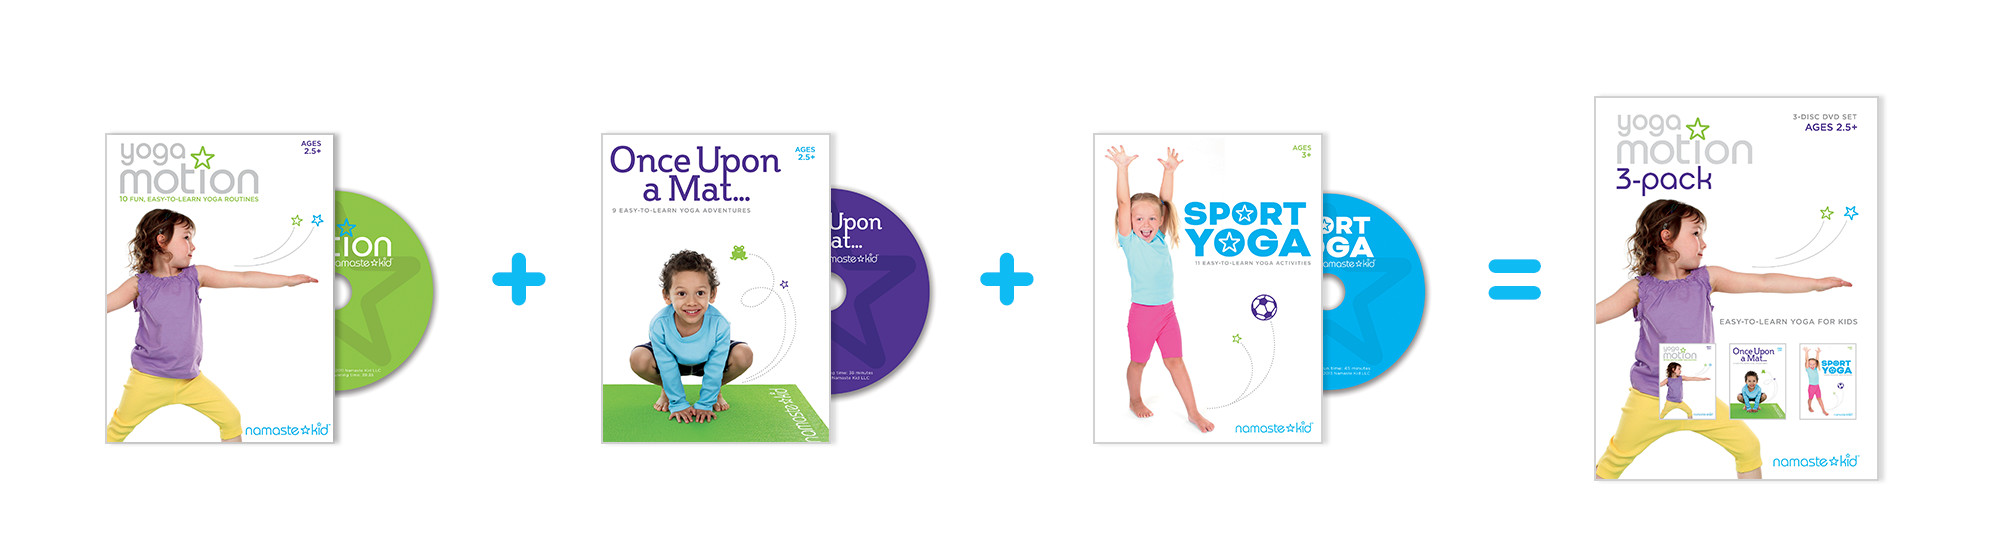 Kids Yoga Poses, Lesson Plans and Activities, Yoga in the Classroom